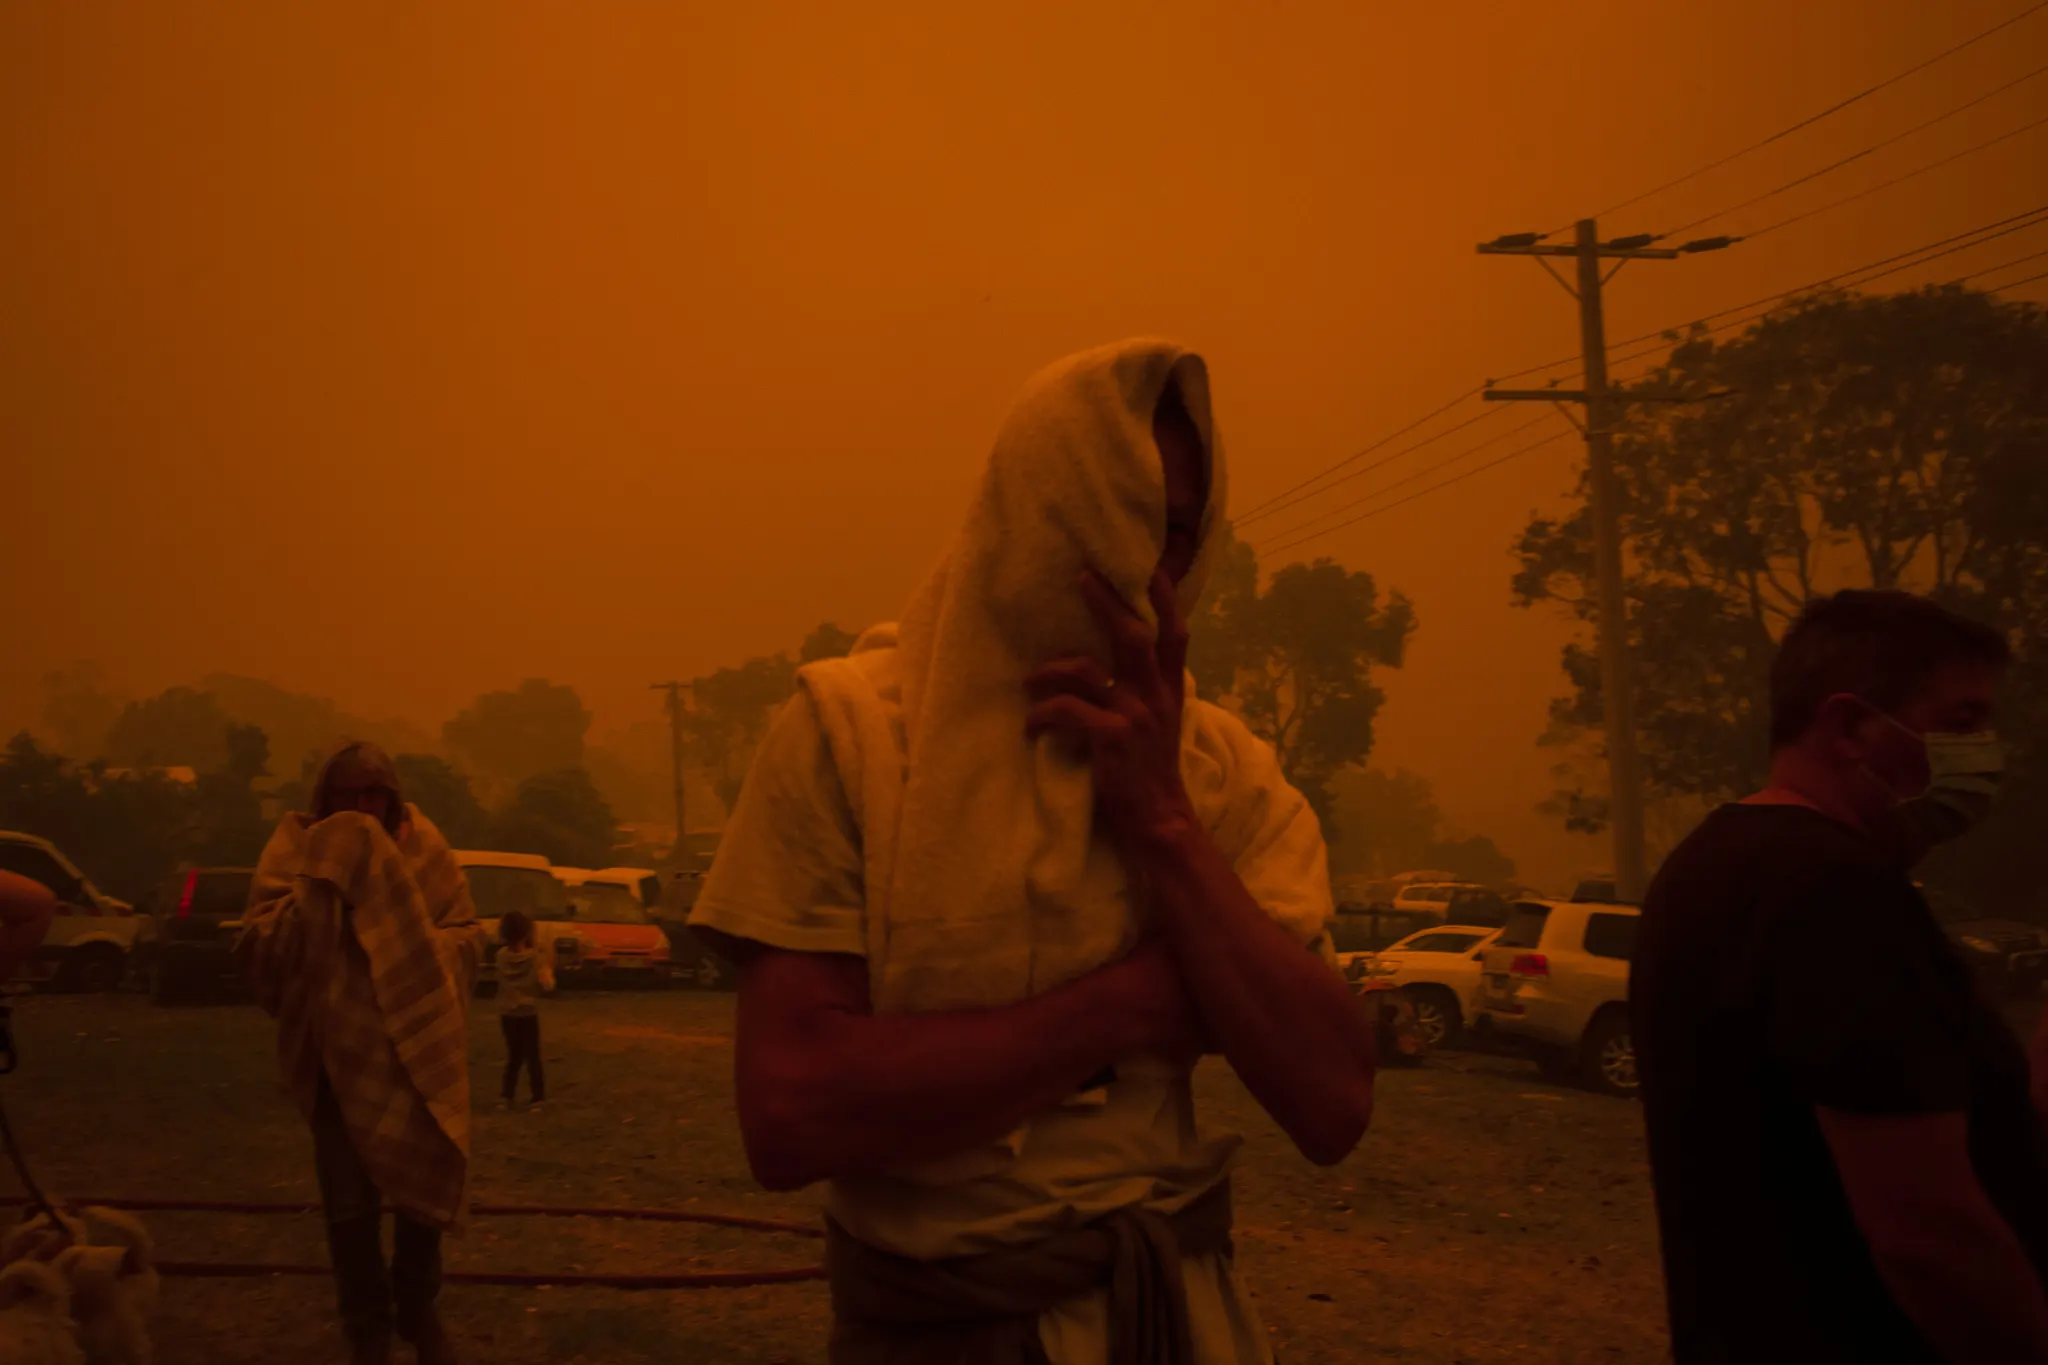 New Year’s Eve 2019: People seek shelter under heavy smoke at the Mallacoota Gymnasium relief centre during the Black Summer bushfires. Photo: Rachel Mounsey / The Sydney Morning Herald